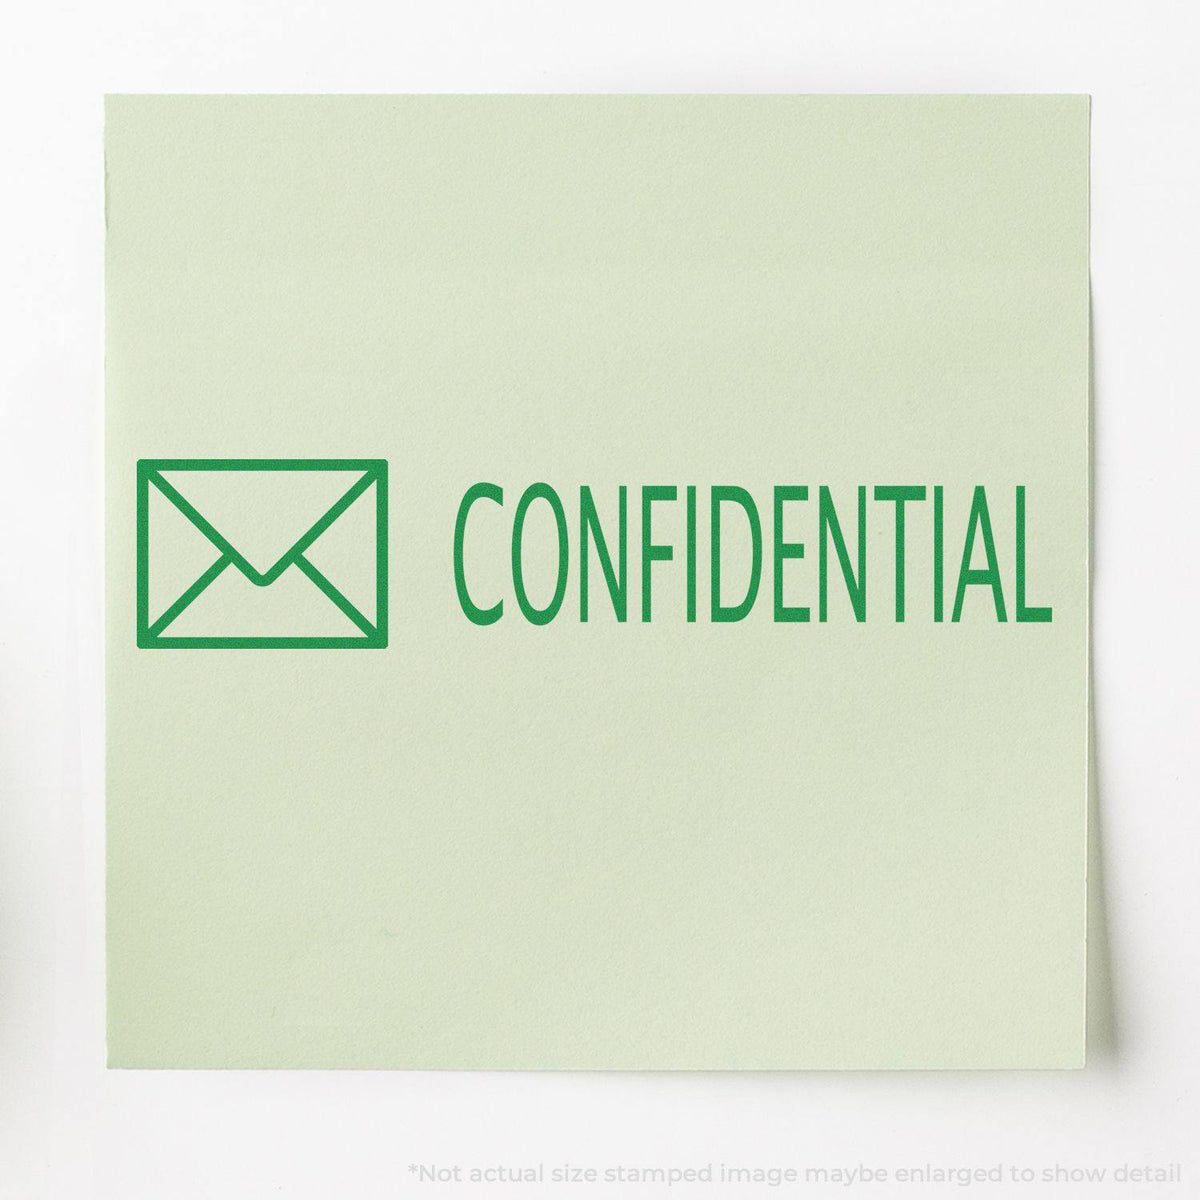 Large Self-Inking Confidential with Envelope Stamp In Use Photo